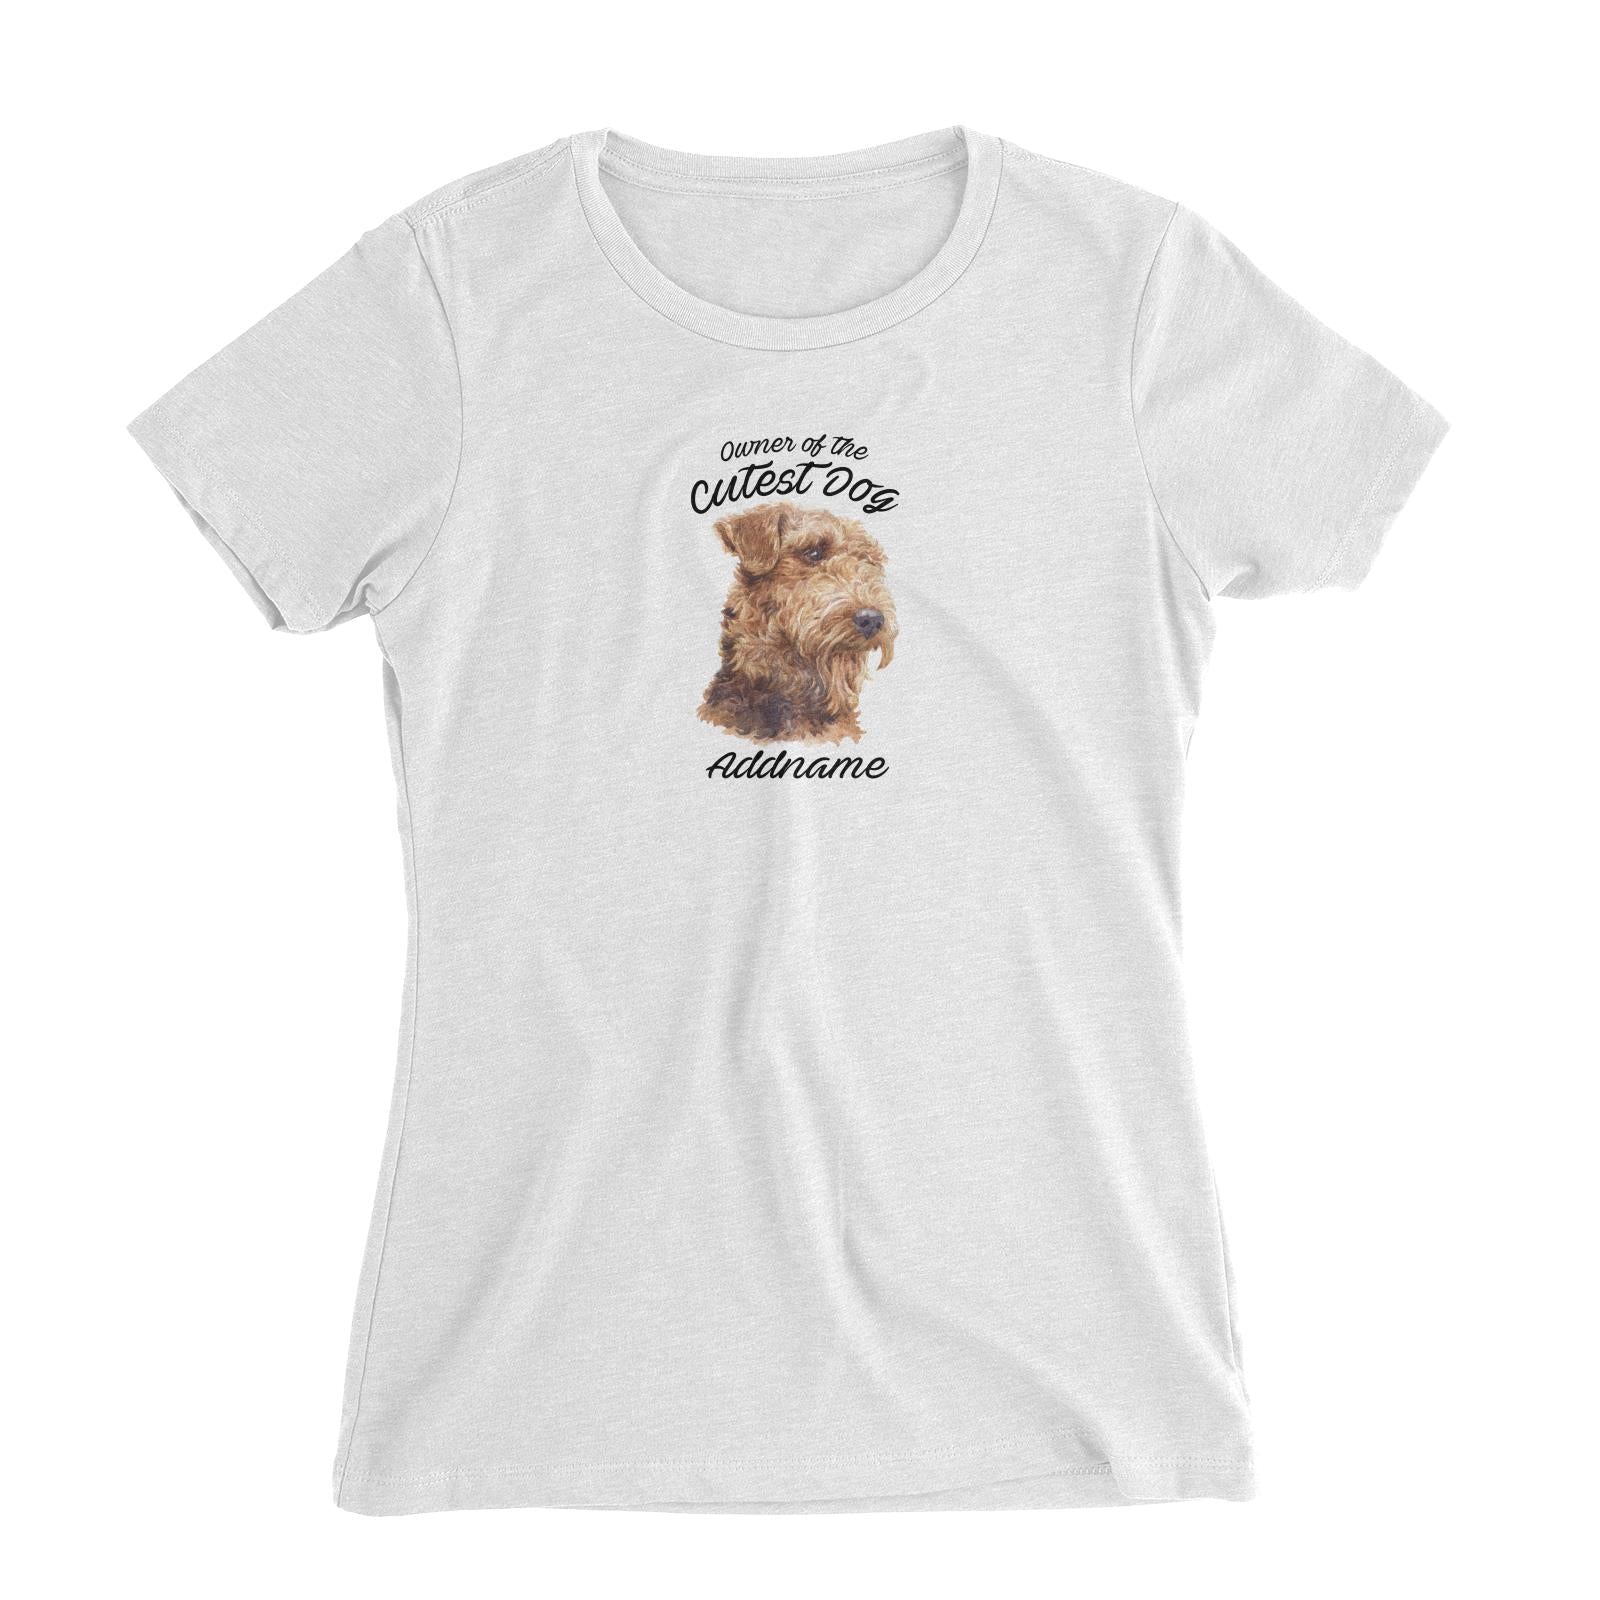 Watercolor Dog Owner Of The Cutest Dog Airedale Terrier Addname Women's Slim Fit T-Shirt